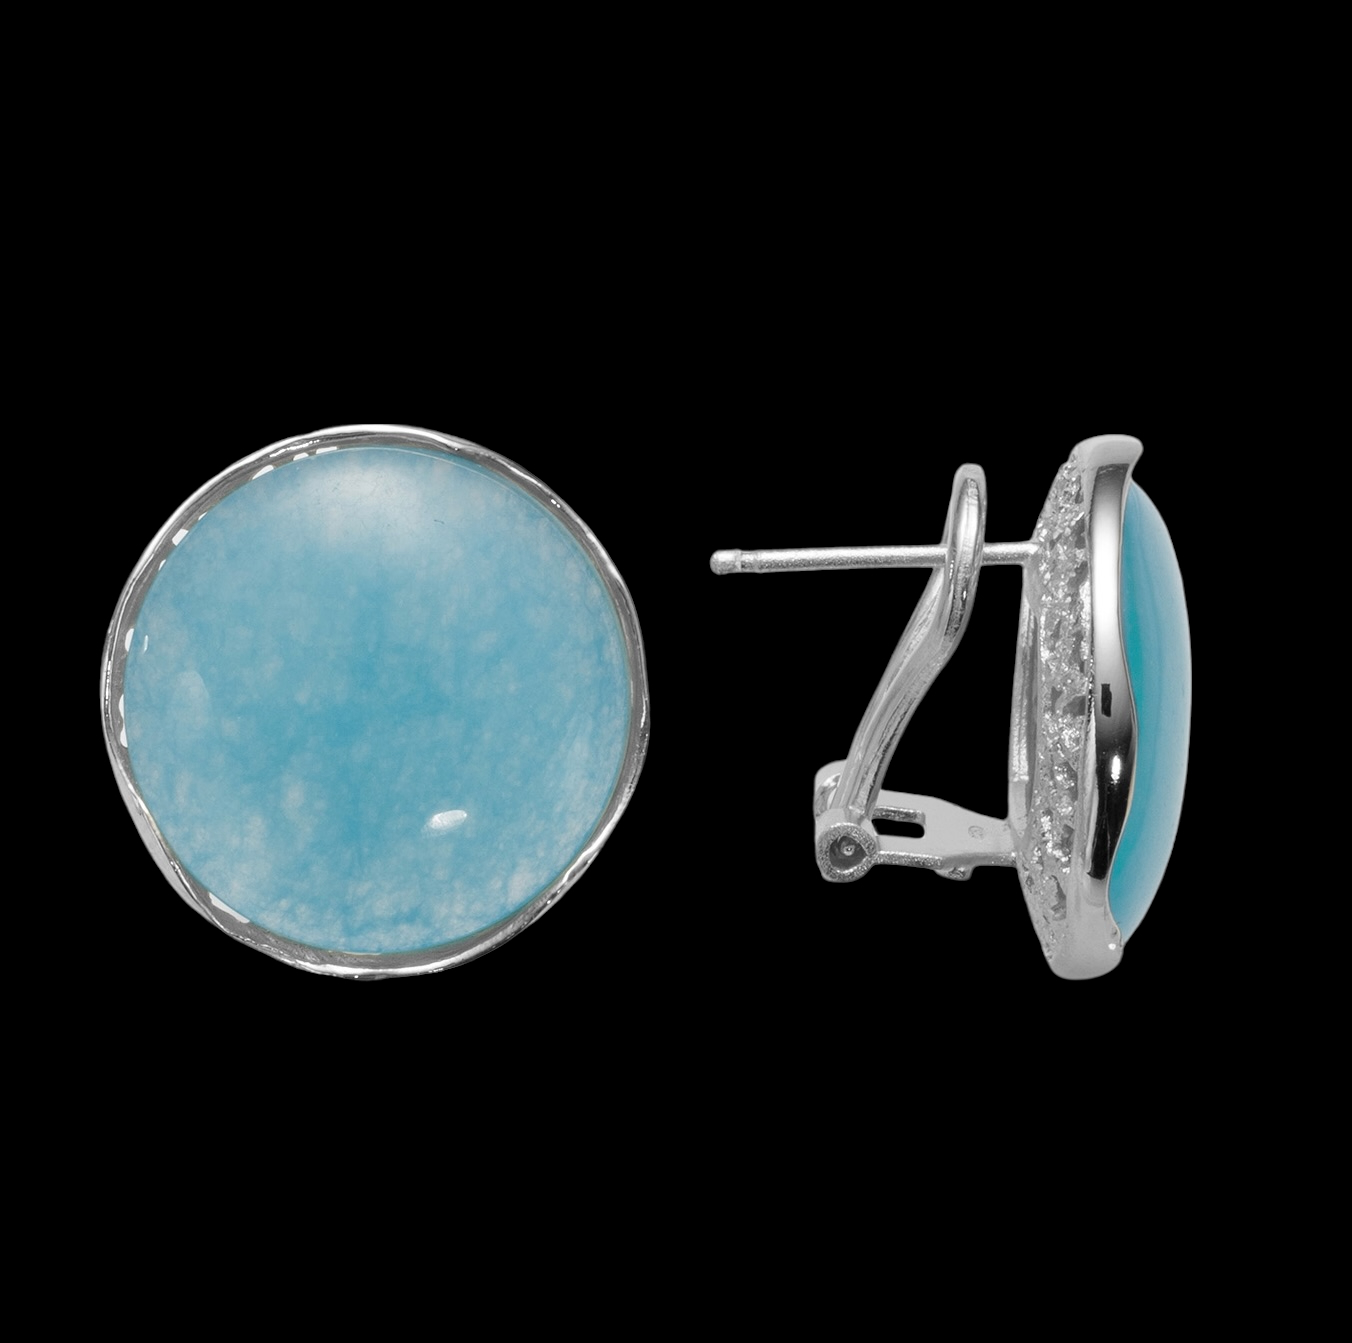 Silver round earrings with a blue quartz stone